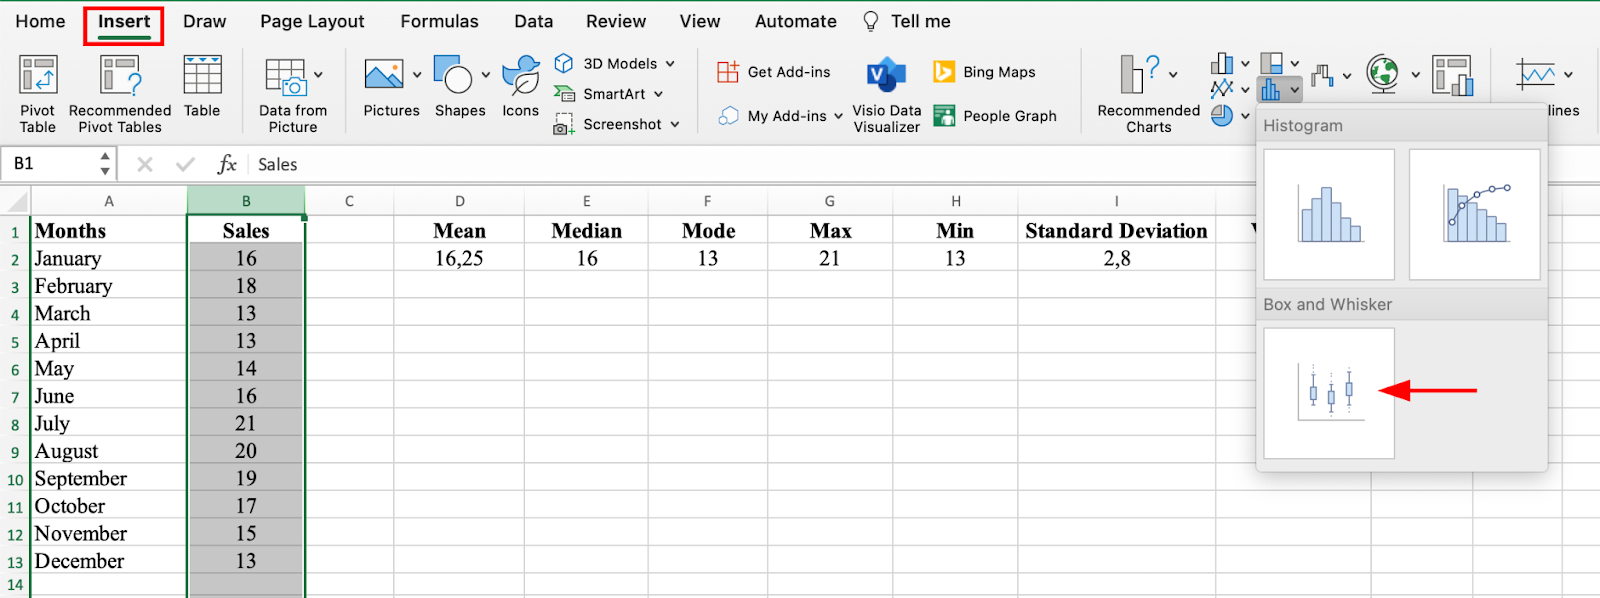 Box and Whisker chart in Excel. Source: uedufy.com